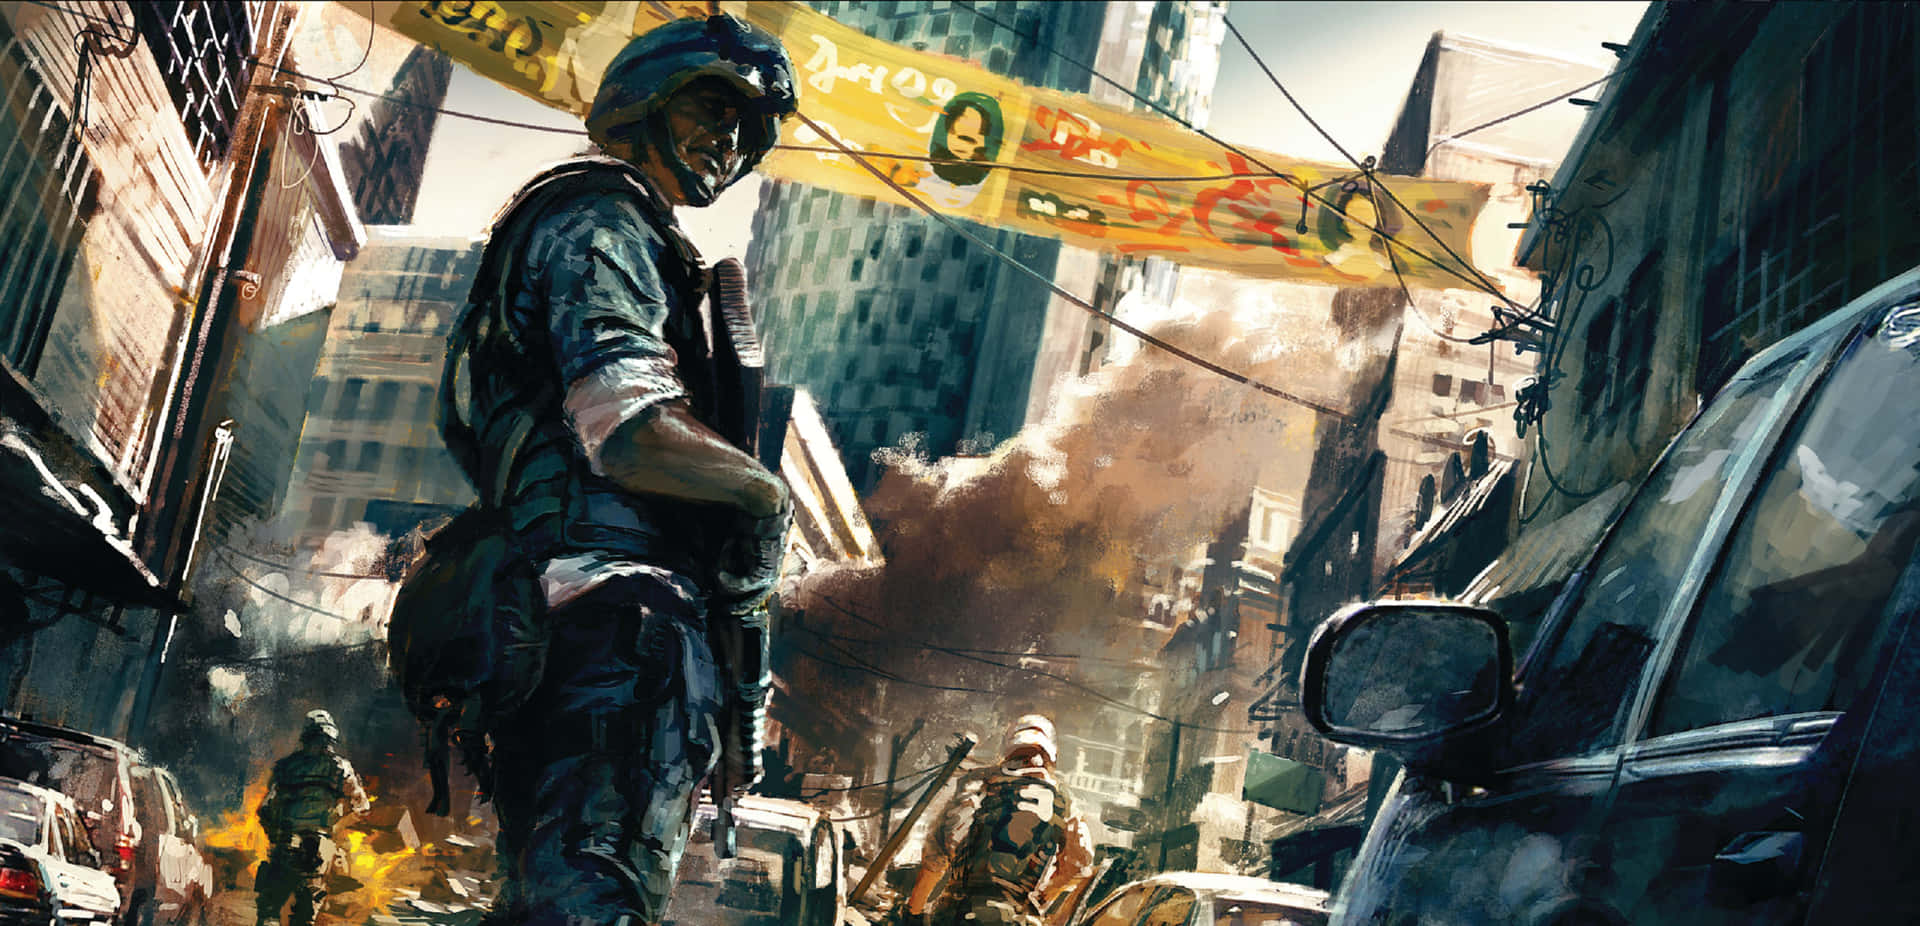 Take a stand in Battlefield 3